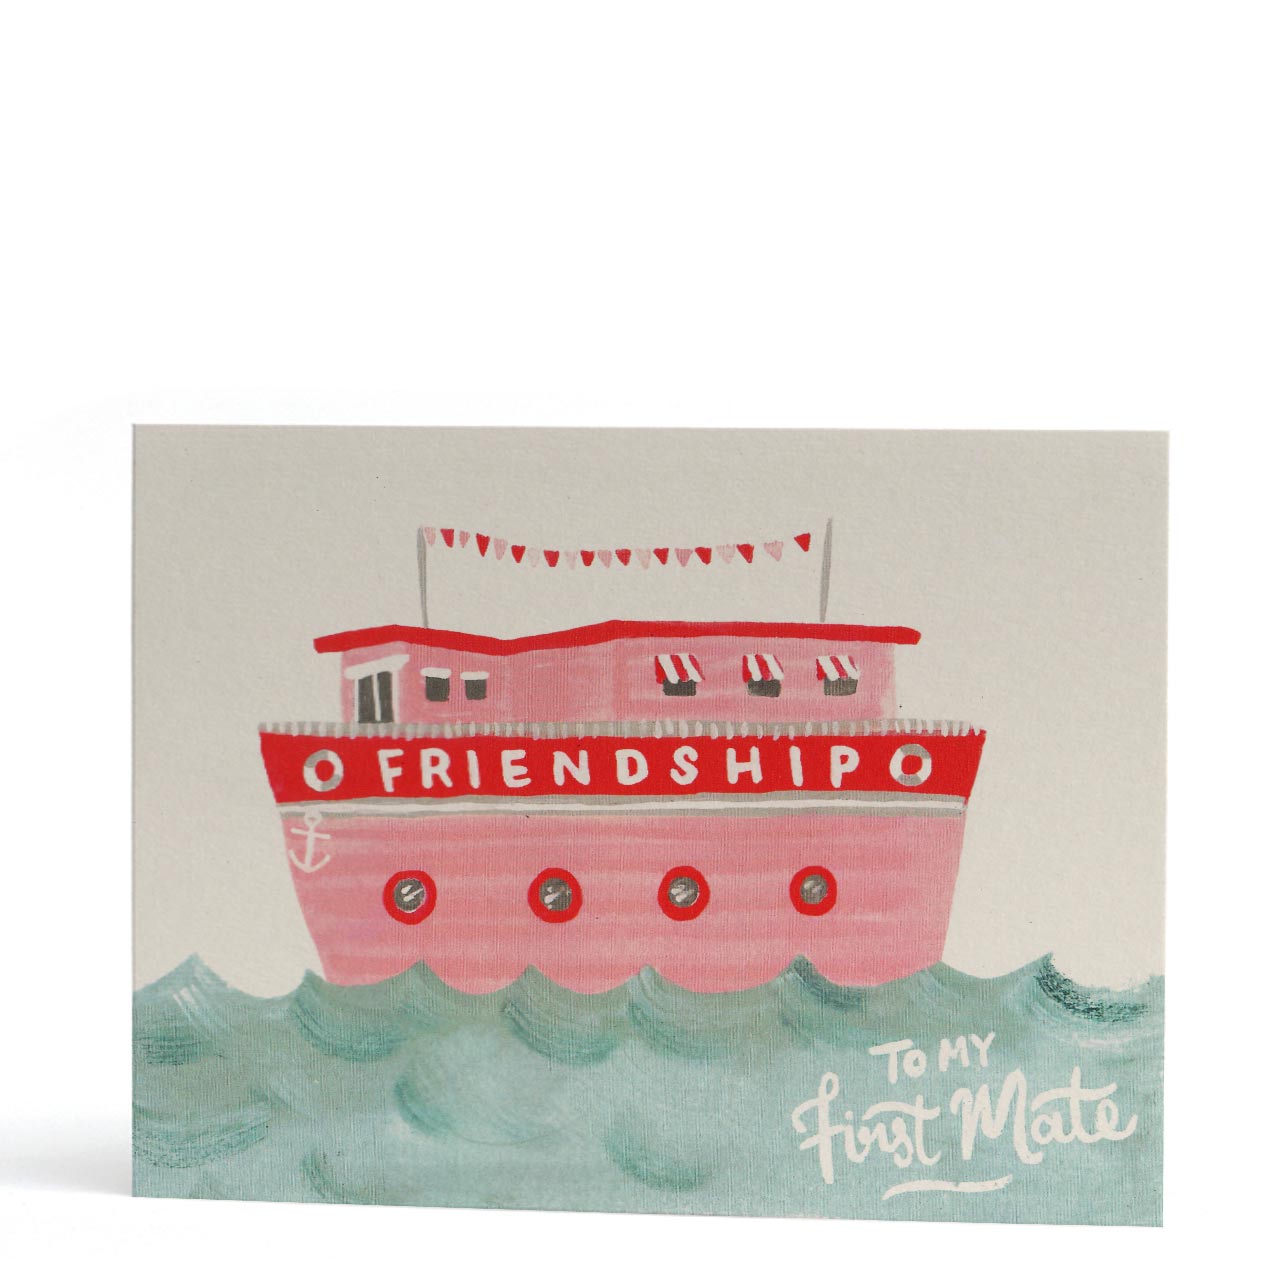 To My First Mate Friendship Card